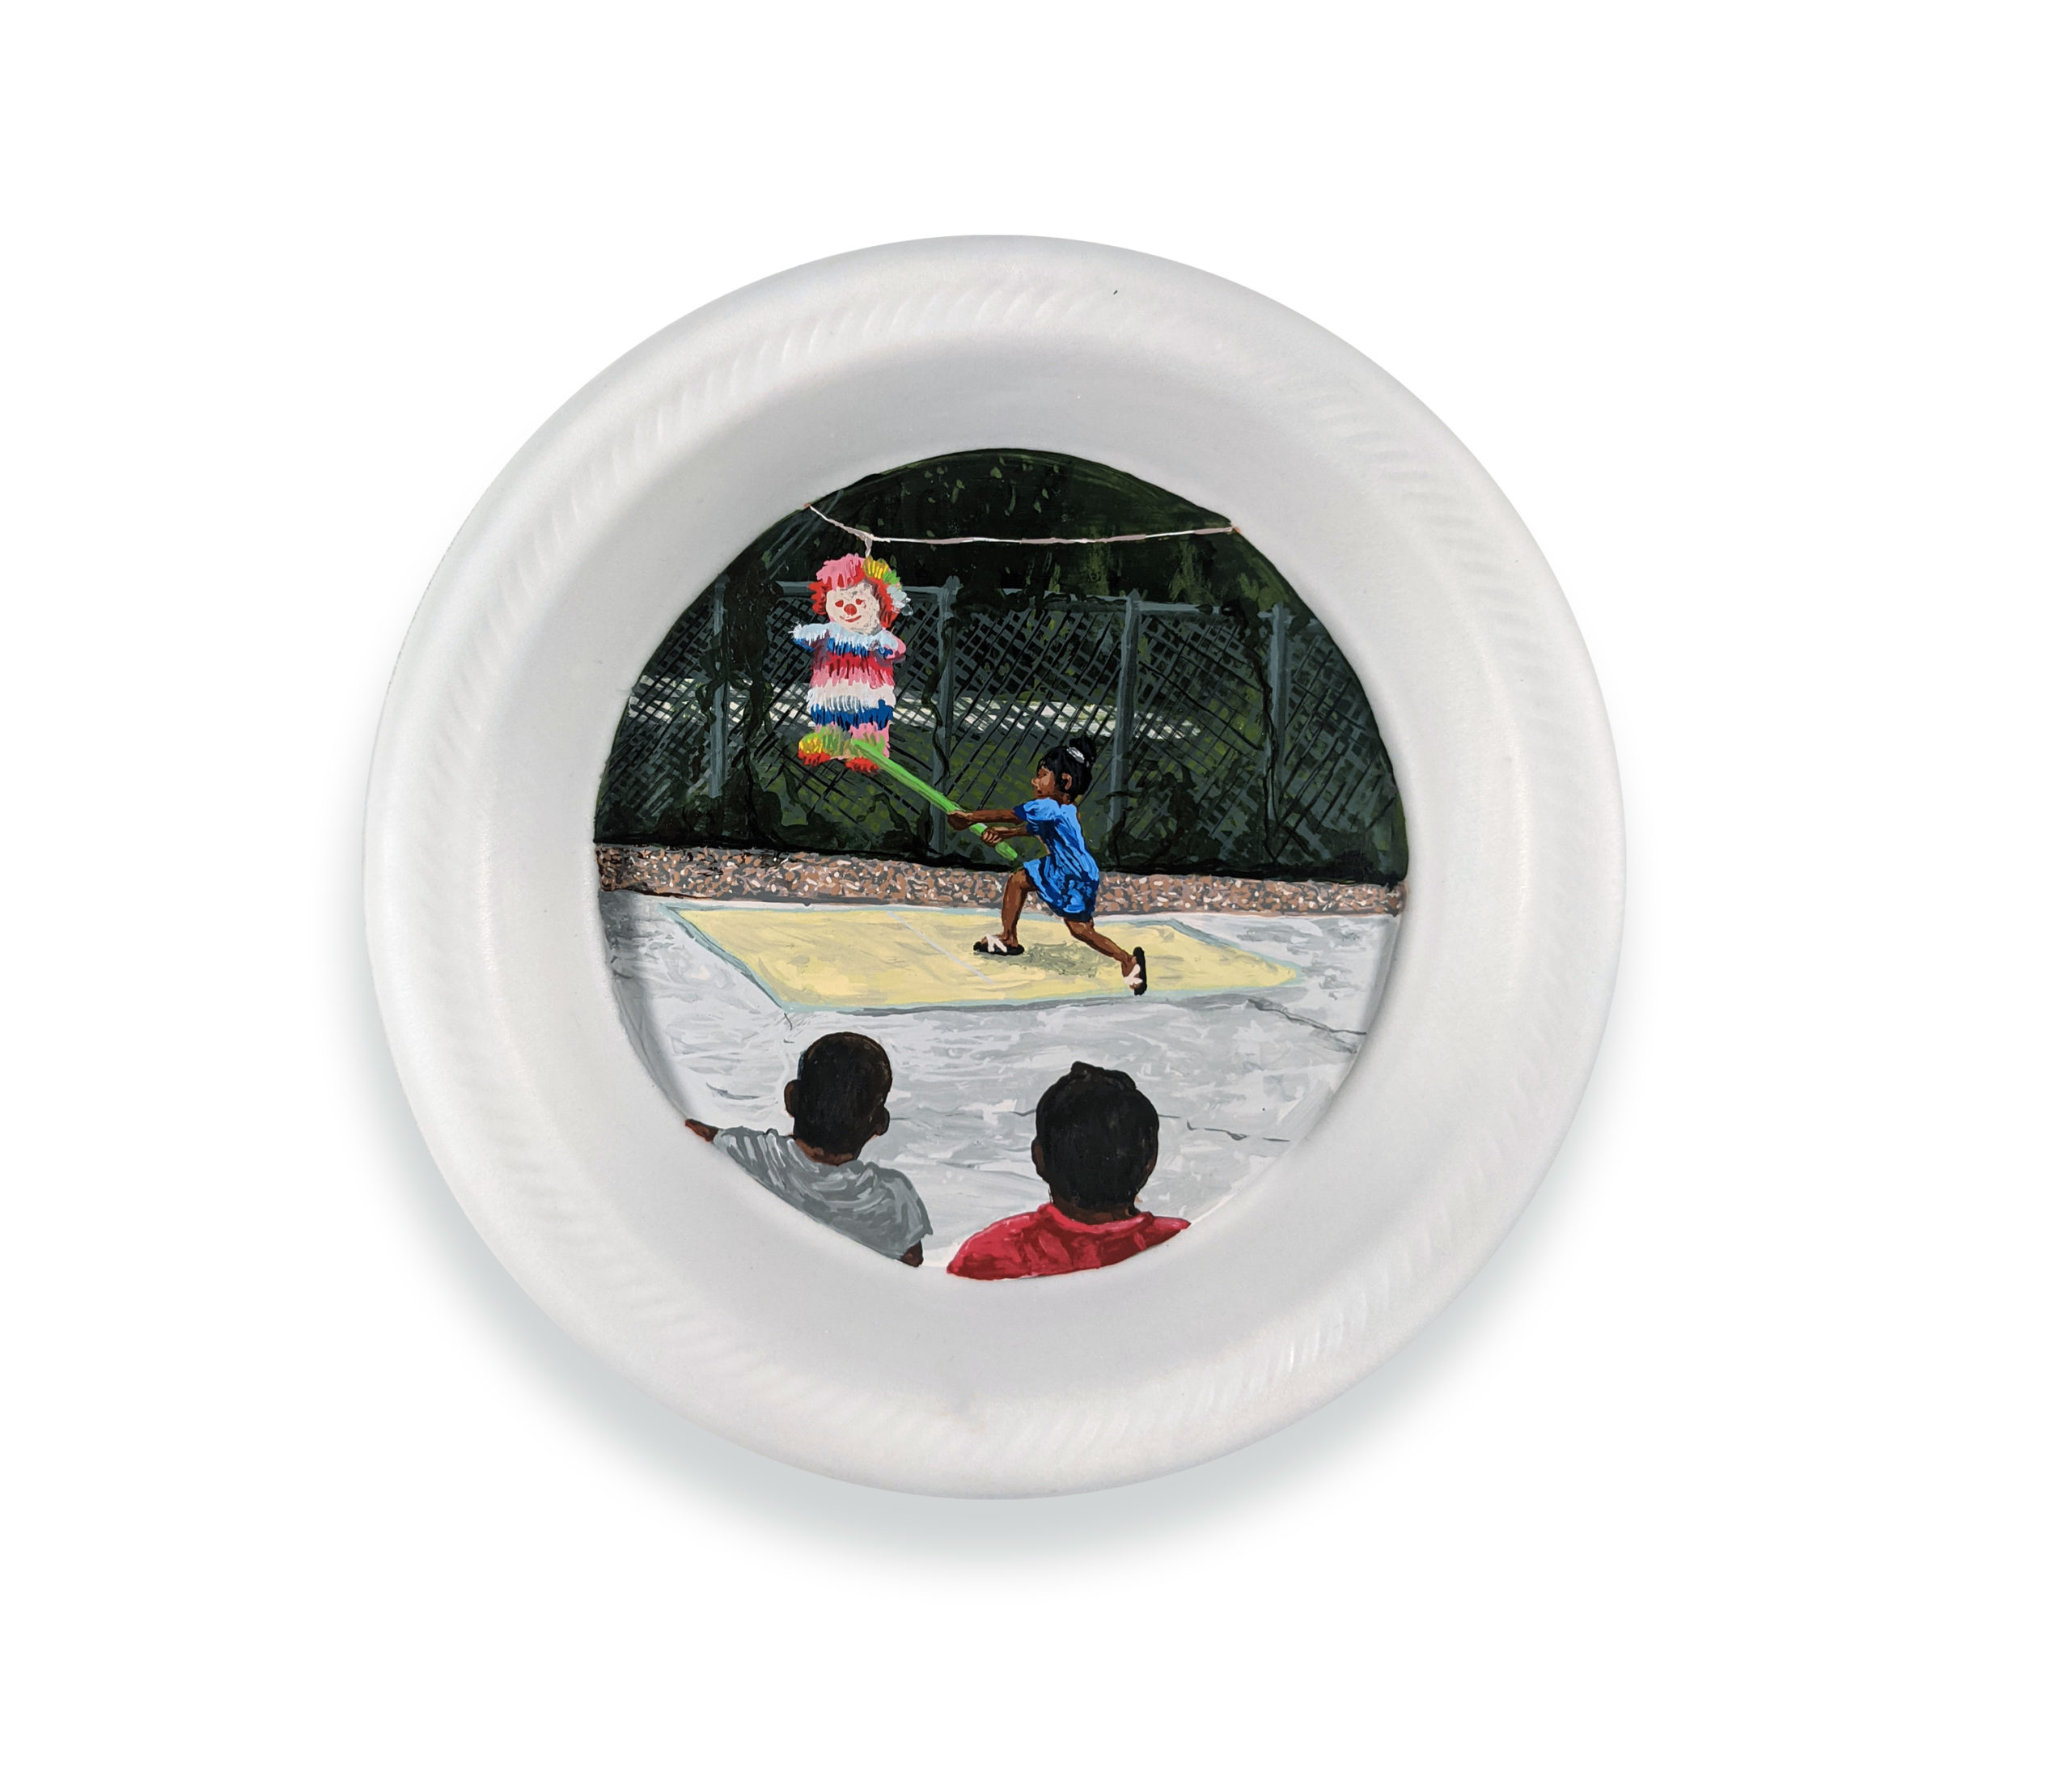 

											Fernando Andrade</b>

											<em>
												Homemade Cakes and Piñatas</em> 

											<h4>
												Santa Fe: June 10 – July 30, 2022											</h4>

		                																																<i>Patsy,</i>  
																																								2022, 
																																								Acrylic and Clear Primer on Styrofoam Plate, 
																																								9 inches in diameter 
																								
		                				